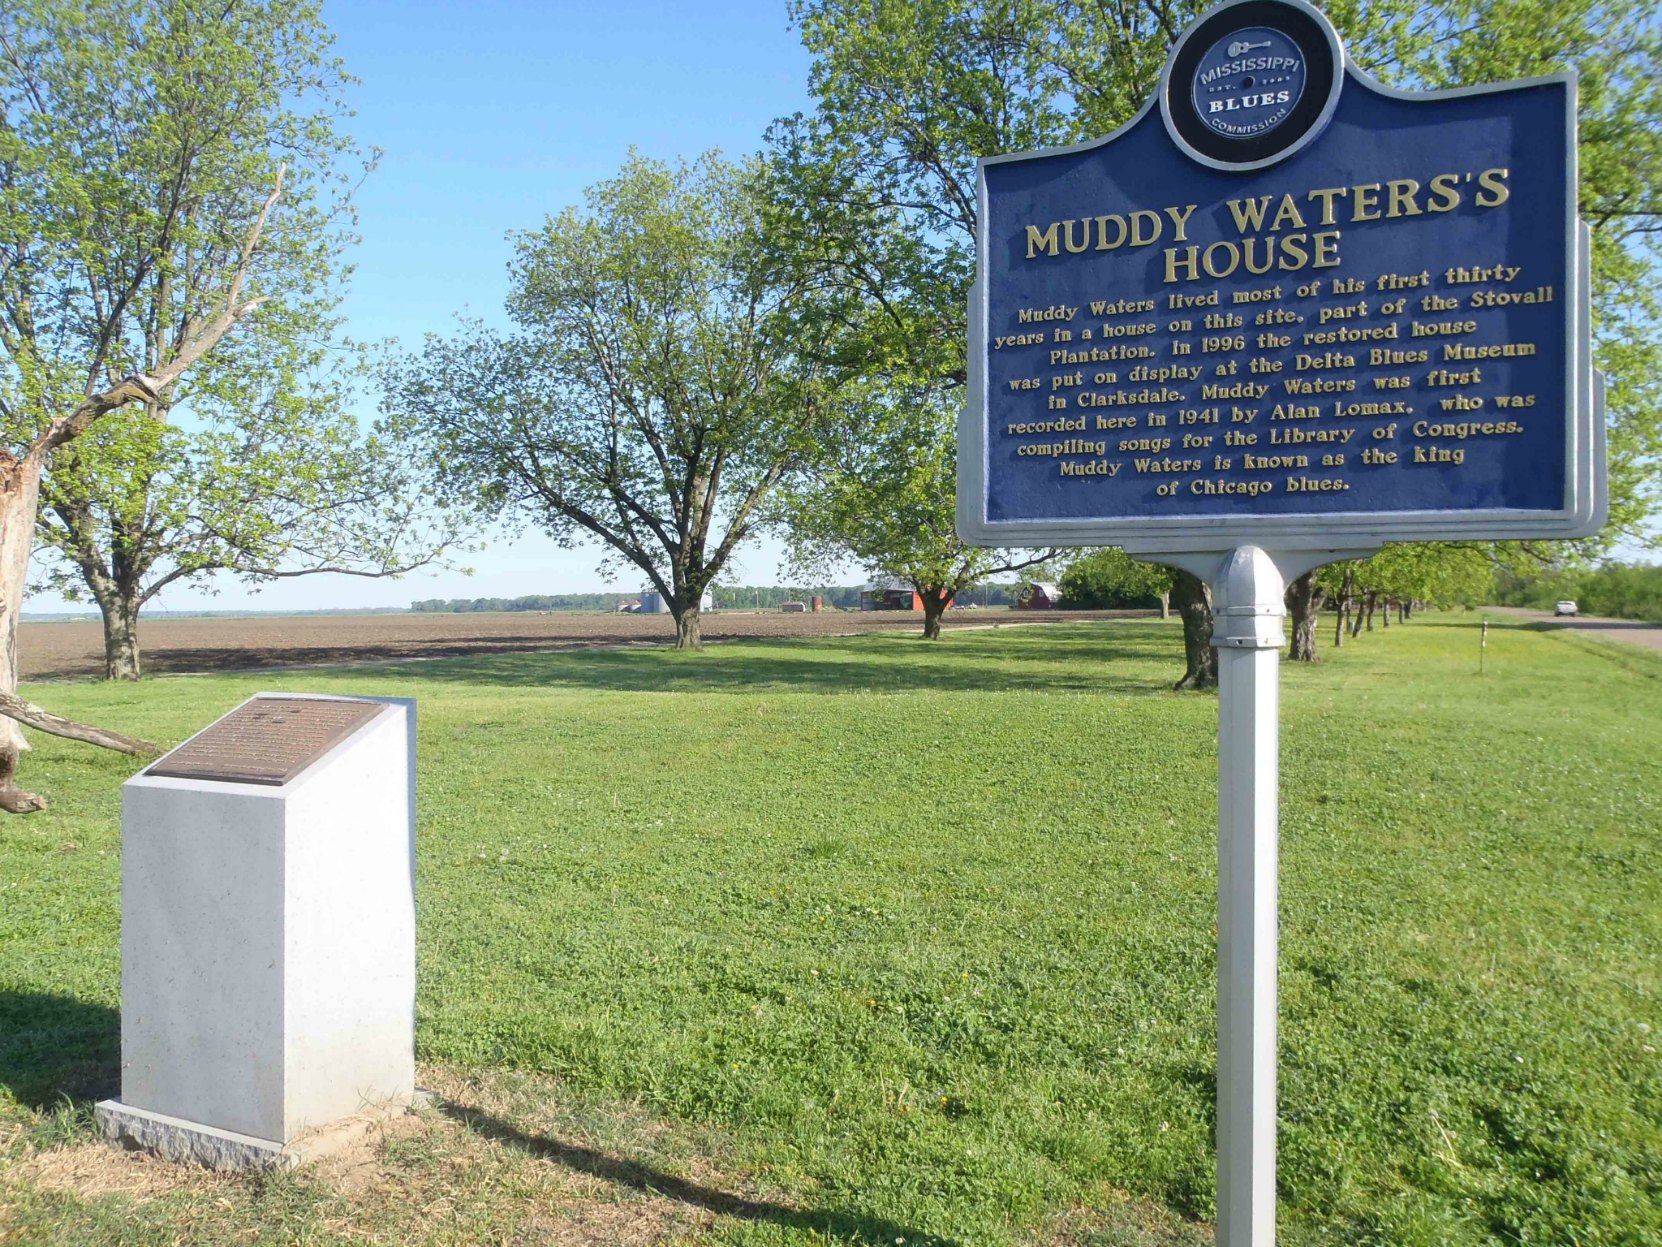 The Mississippi Blues Trail marker and the Blues Hall of Fame marker at the Muddy Waters House site, Stovall Farms, outside Clarksdale, Mississippi.